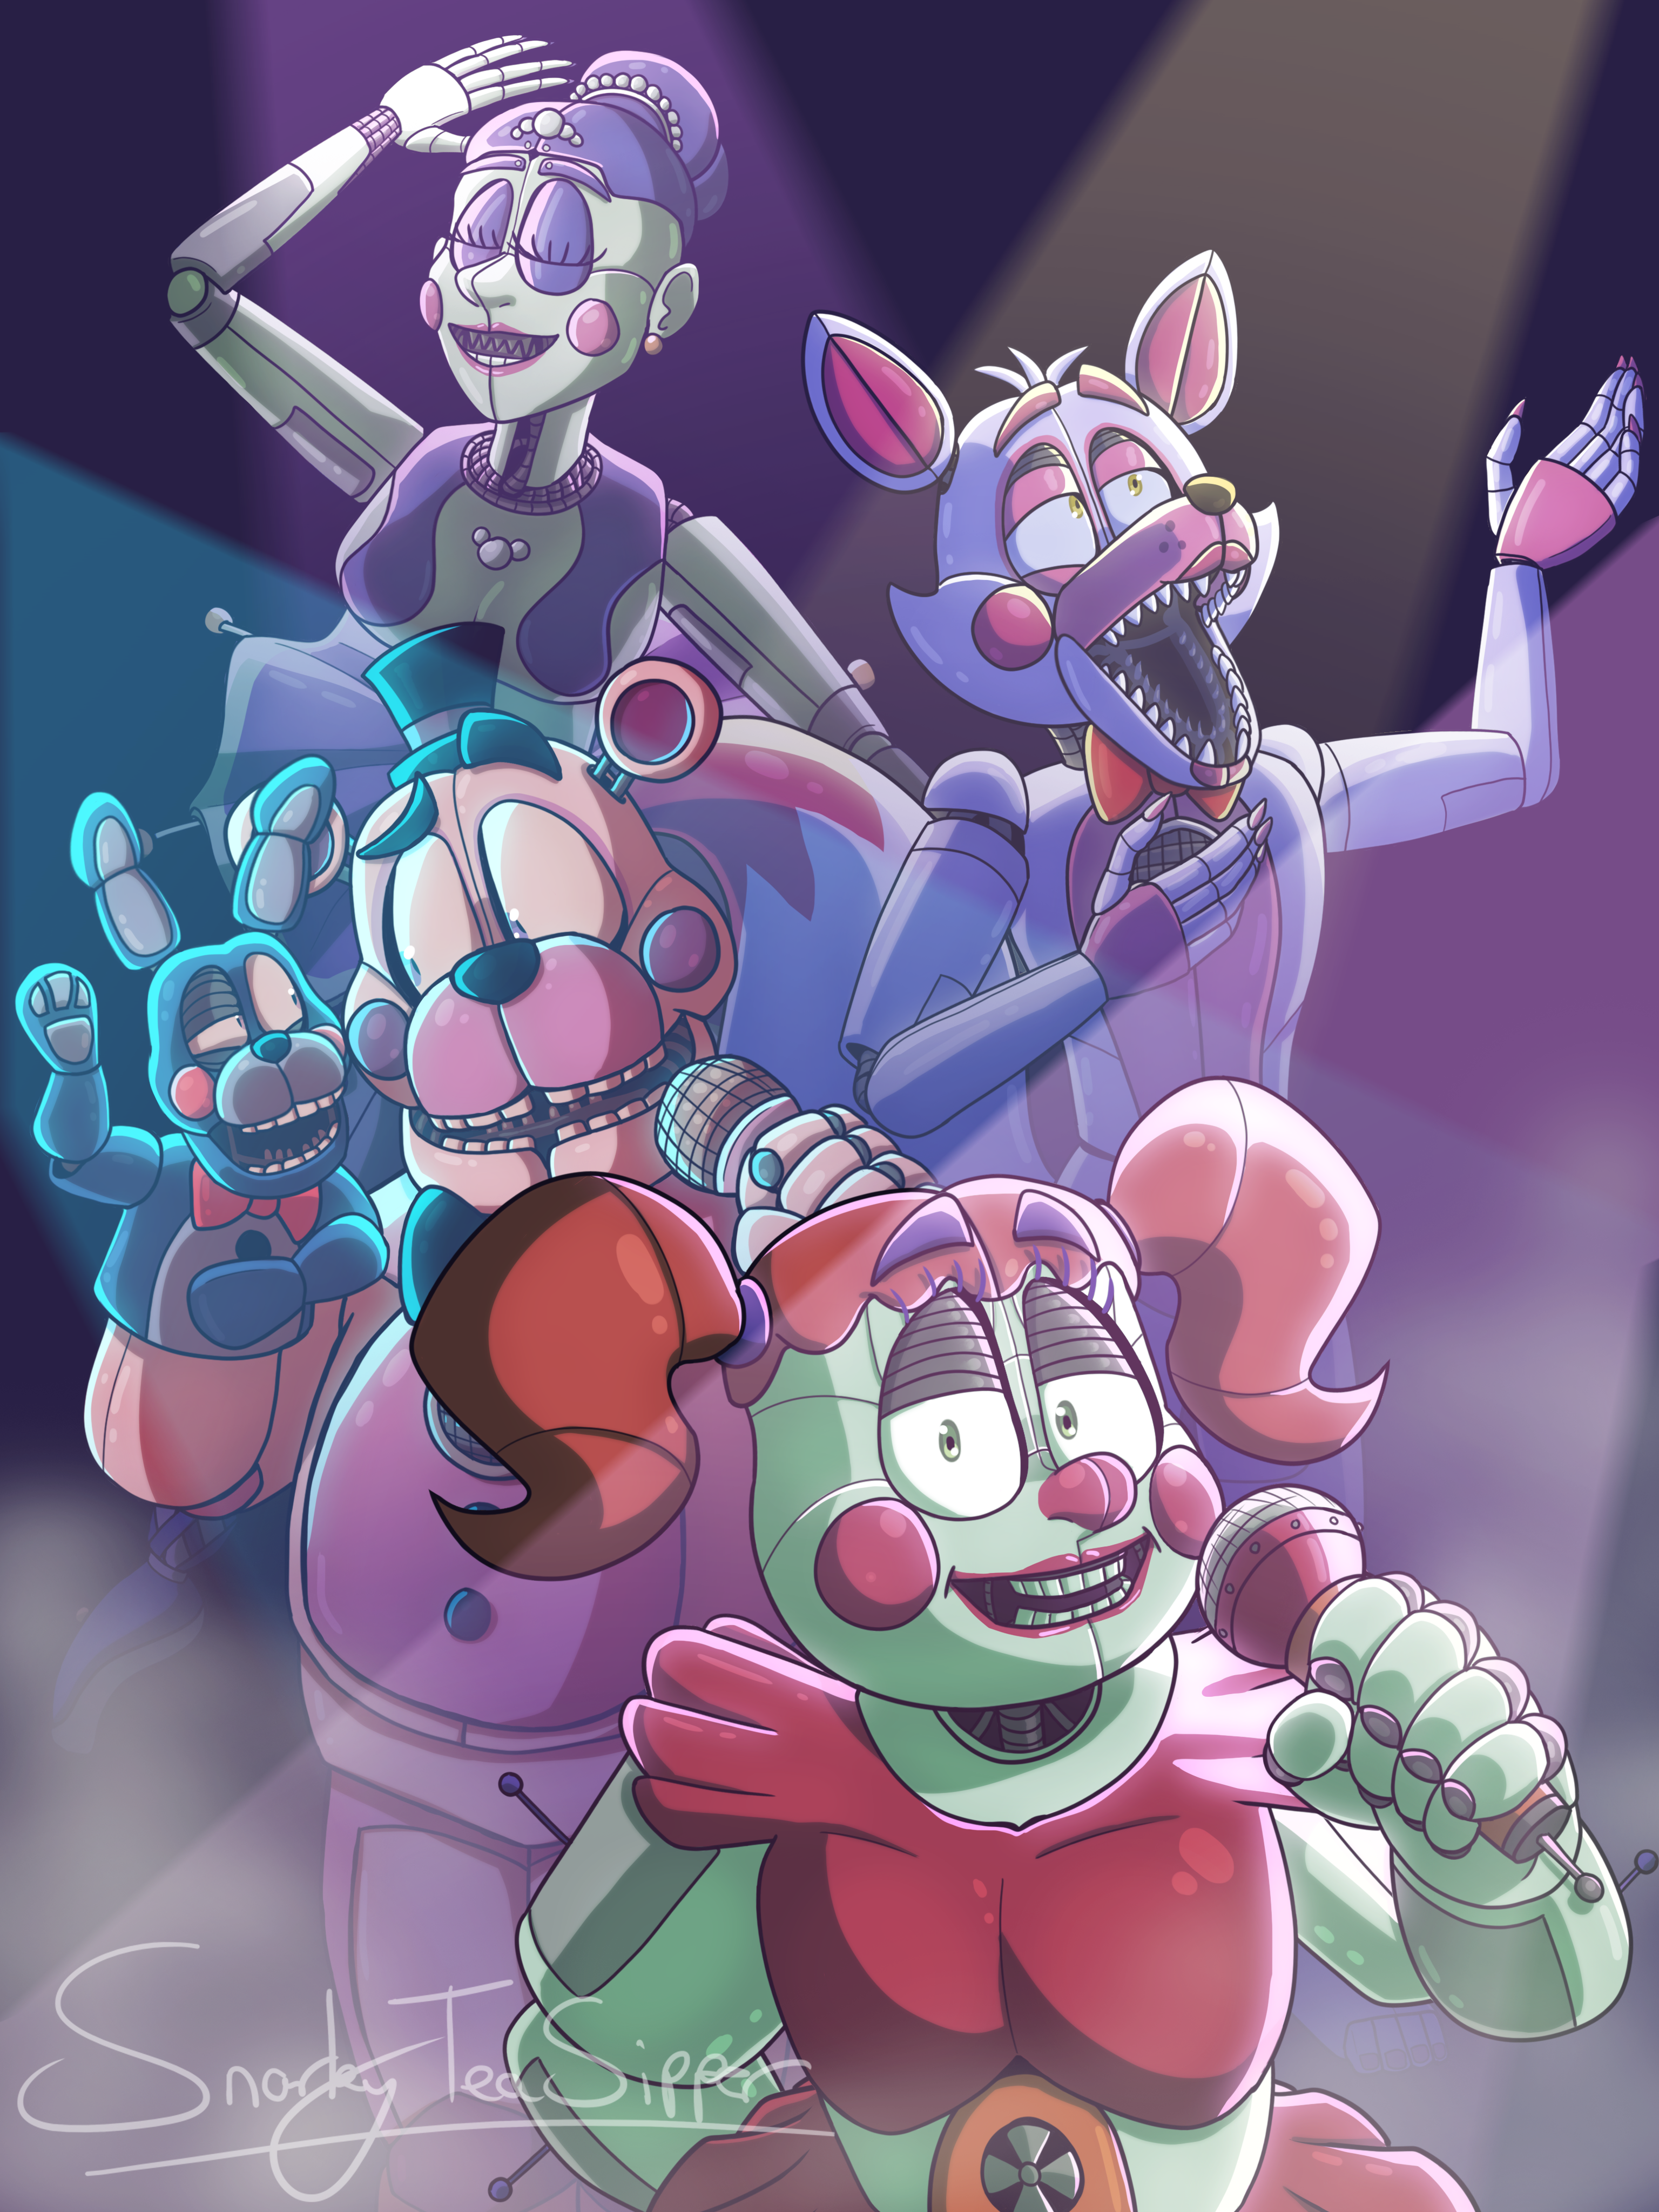 I used to draw a bunch of fanart when the game came out, the new fnaf